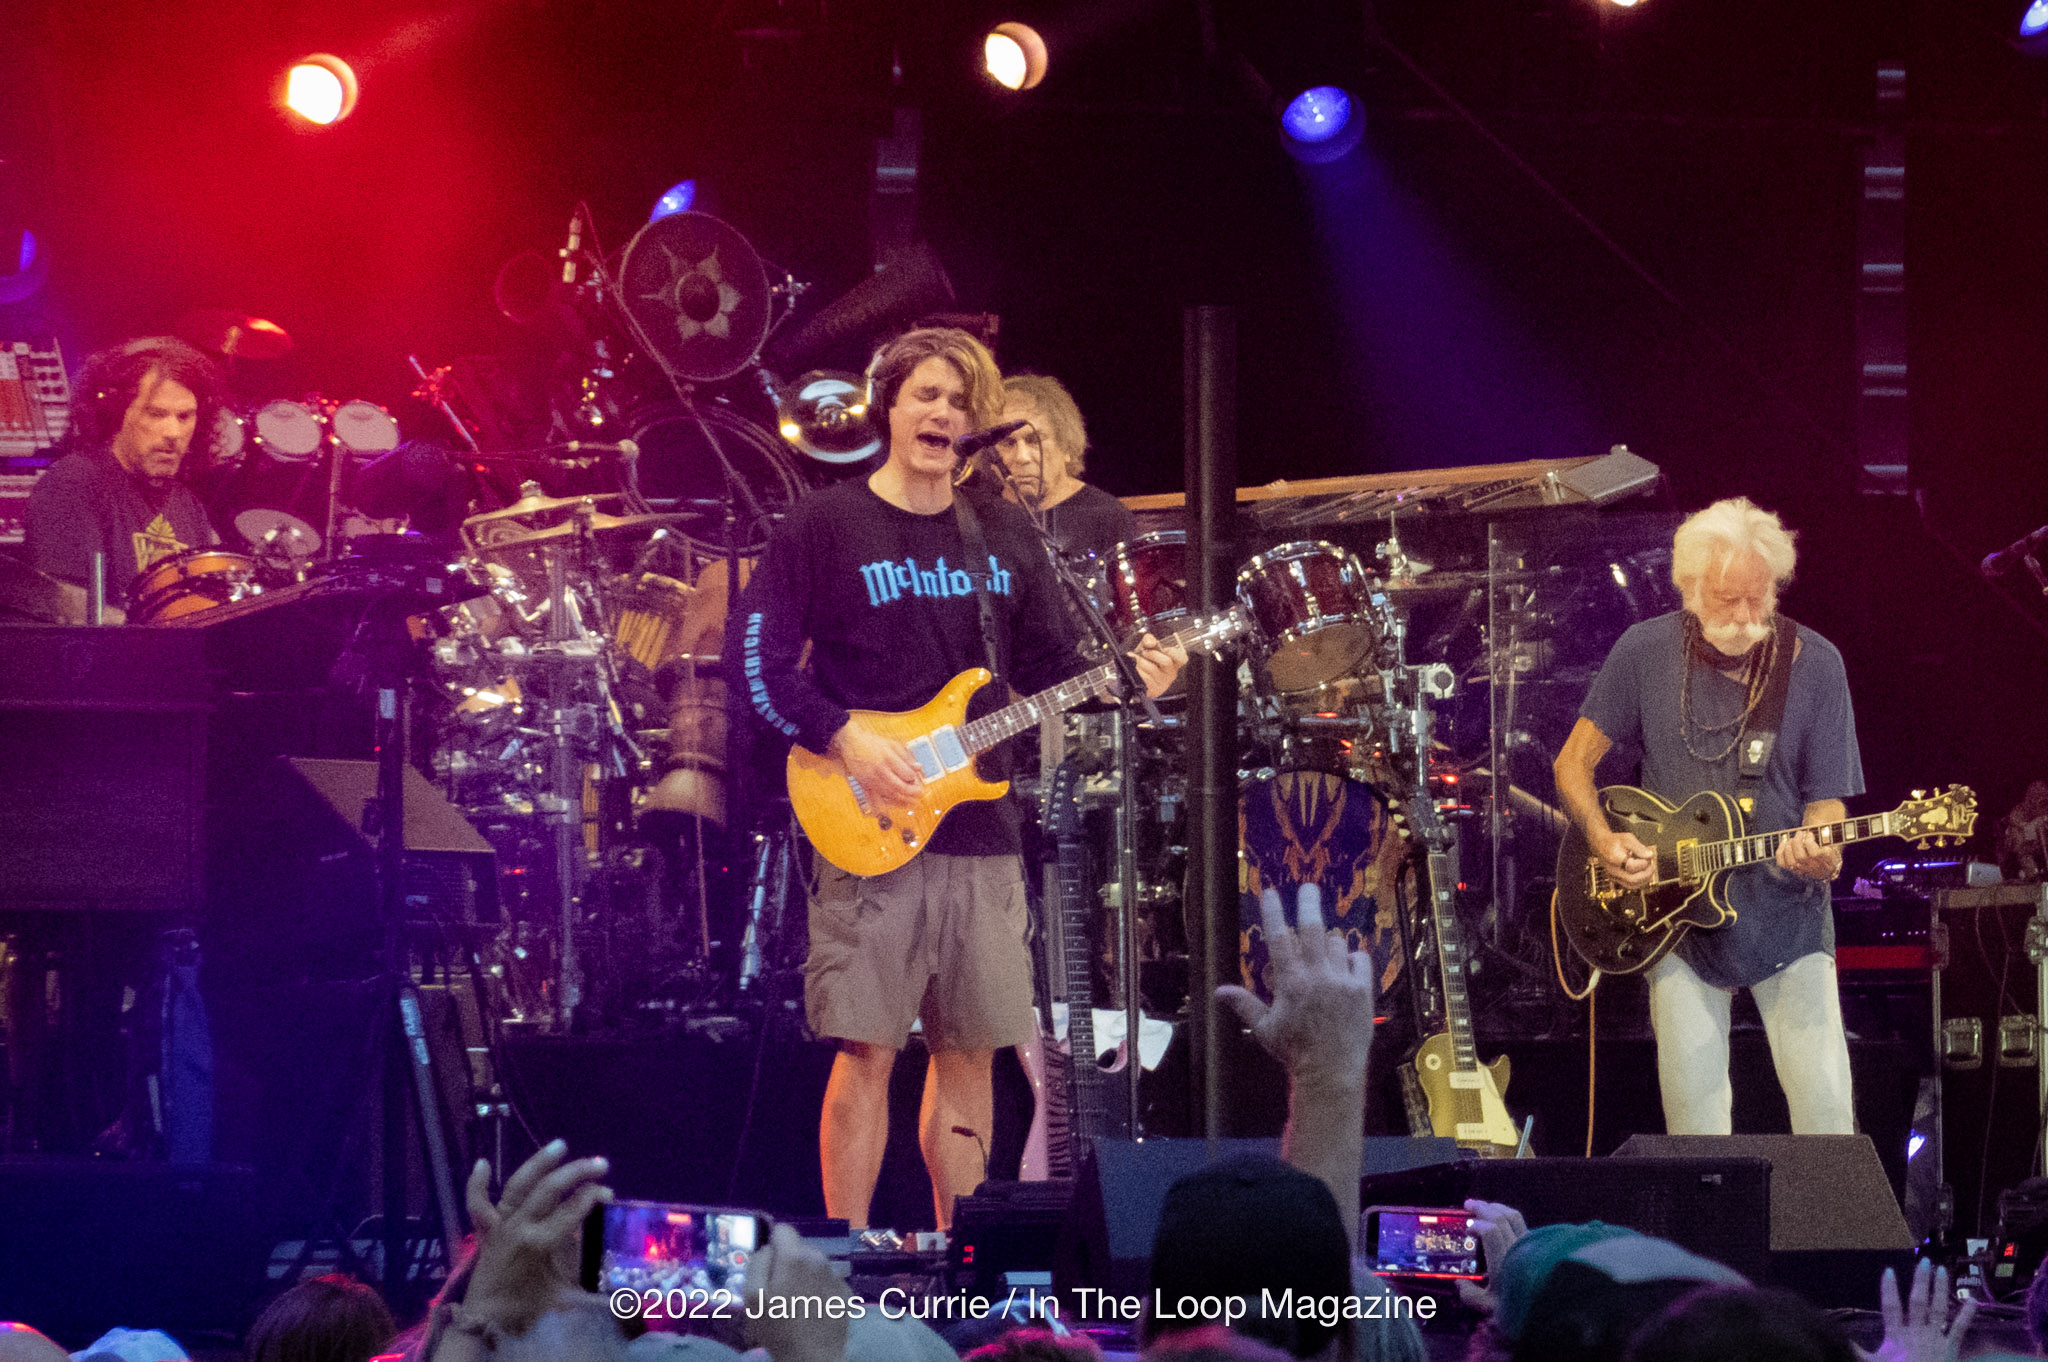 The Dead and Company Return To Chicago For Two Nights At The Friendly Confines